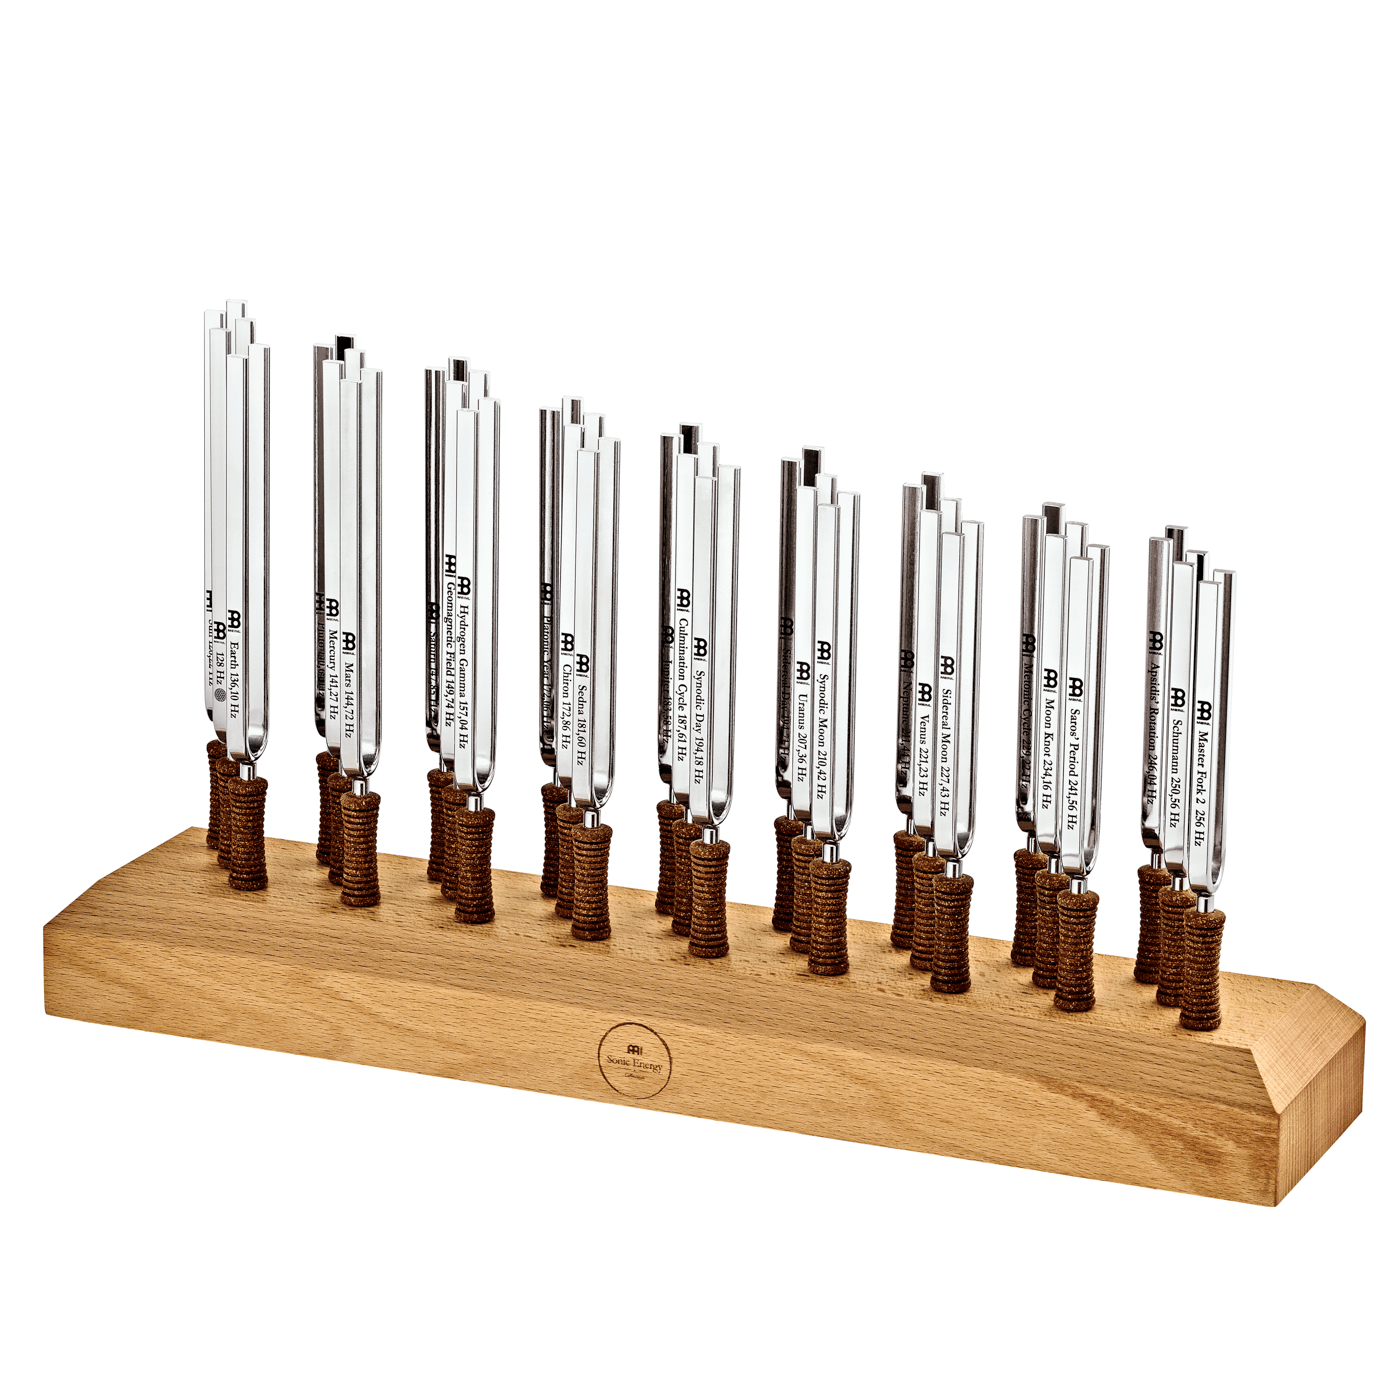 Planetary Tuning Forks Complete Set of 27 Handmade Steel Tuners - Planetary Tuned Tuning Forks